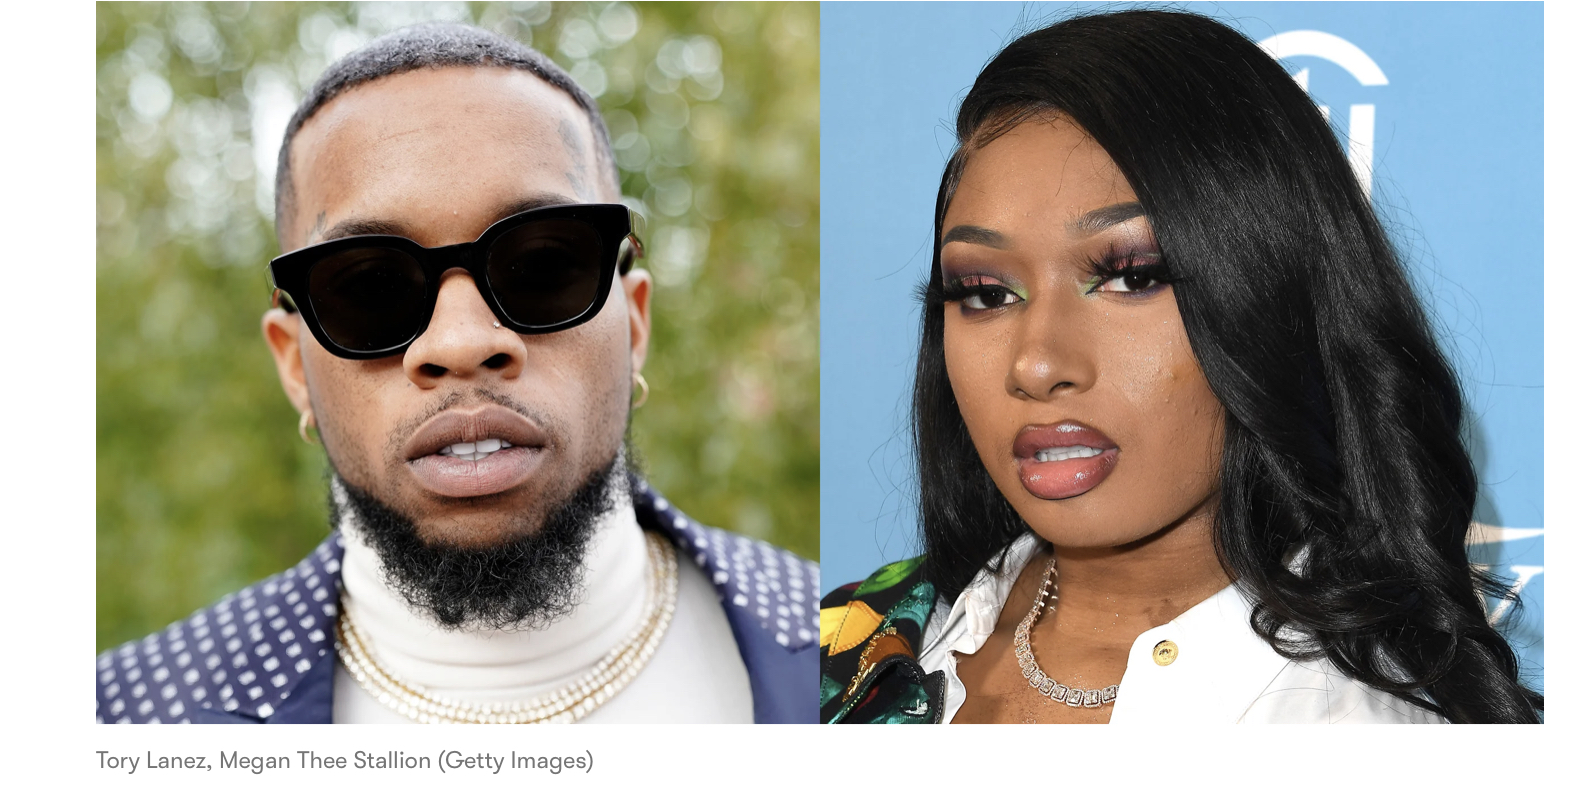 Tory Lanez charged in connection to the shooting of Megan Thee Stallion